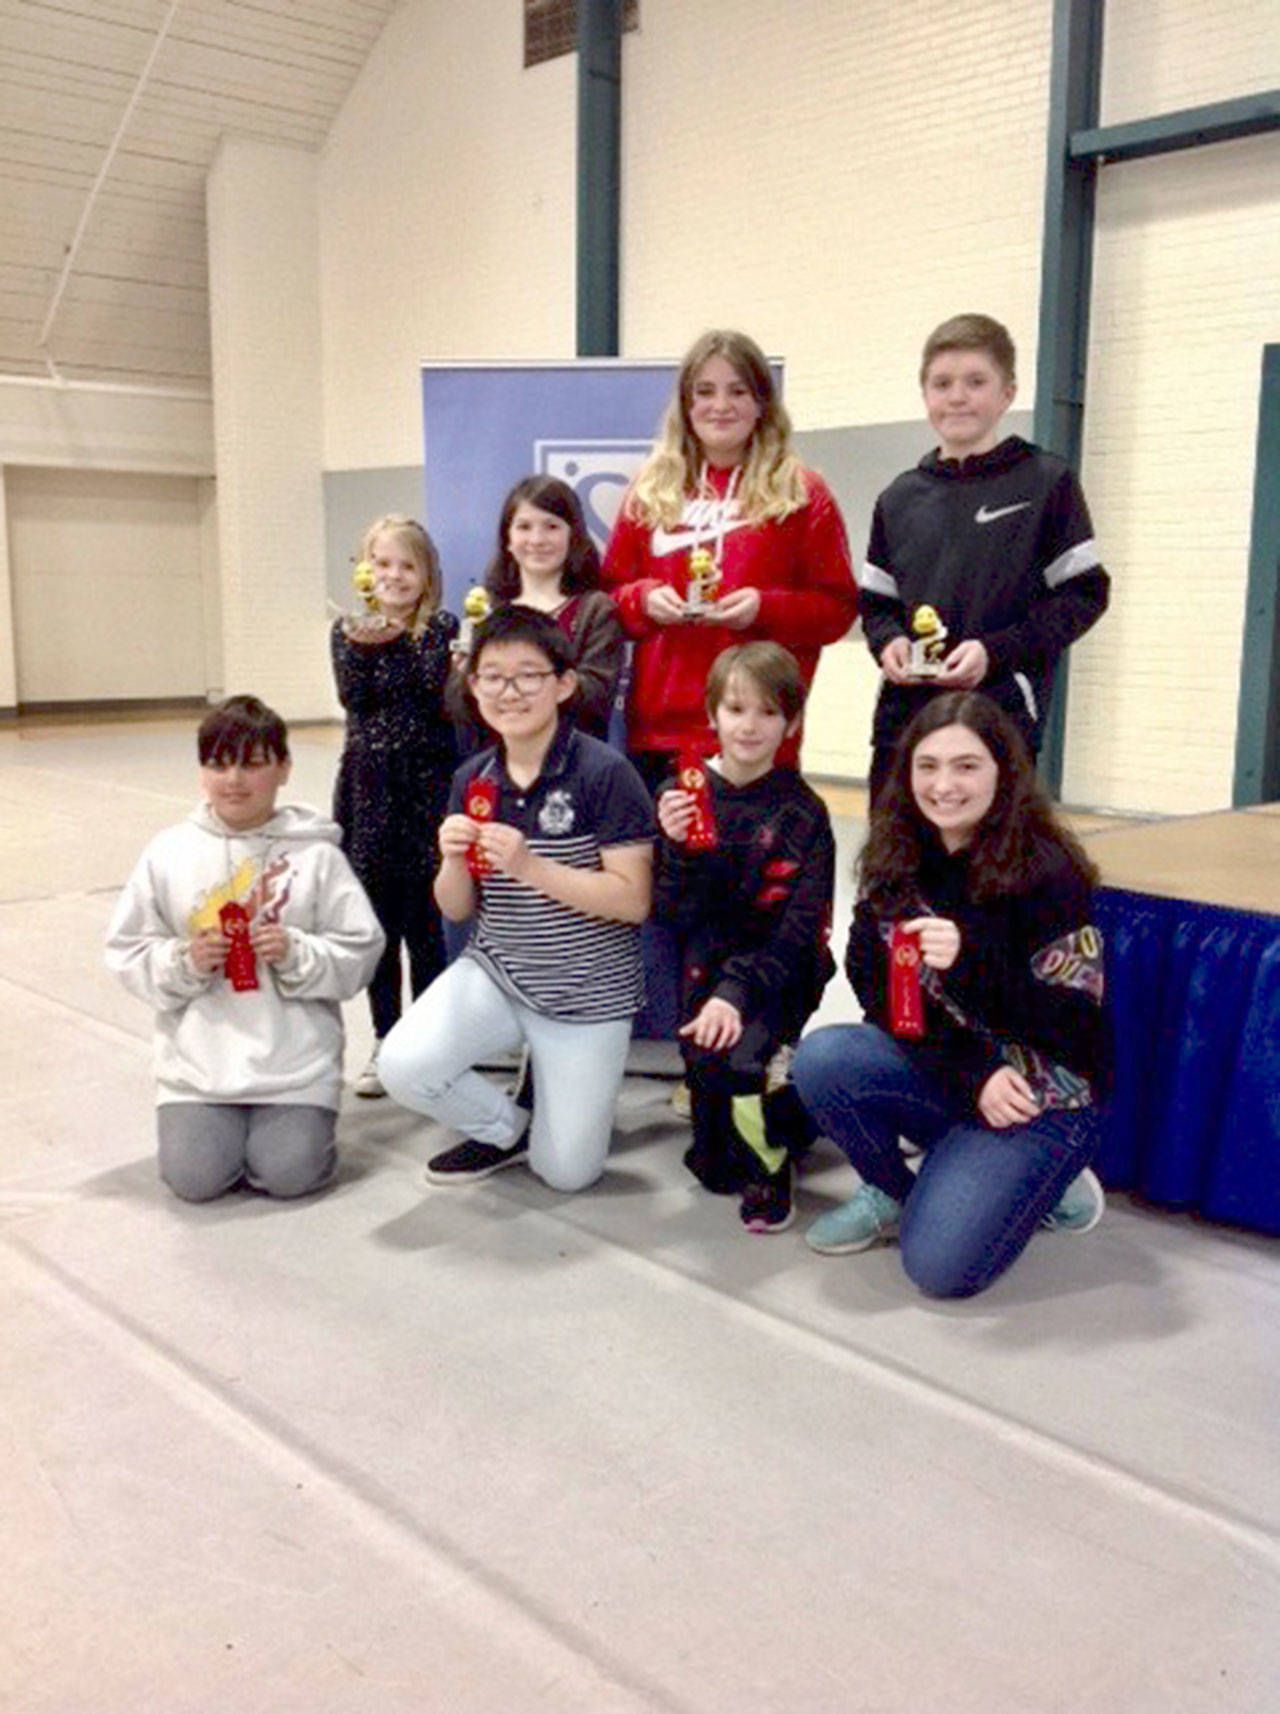 Winners of this year’s Soroptimist Spelling Bee, standing from left to right are Mya Callis, Miriam Cobb, Kylie Brandt and Liam McBride. Kneeling in the front, from left to right are second-place winners Chase Wojnowski, Nicky Park, Cade Whitaker and Allison Broadwell. (Photo by Patty Rosand)